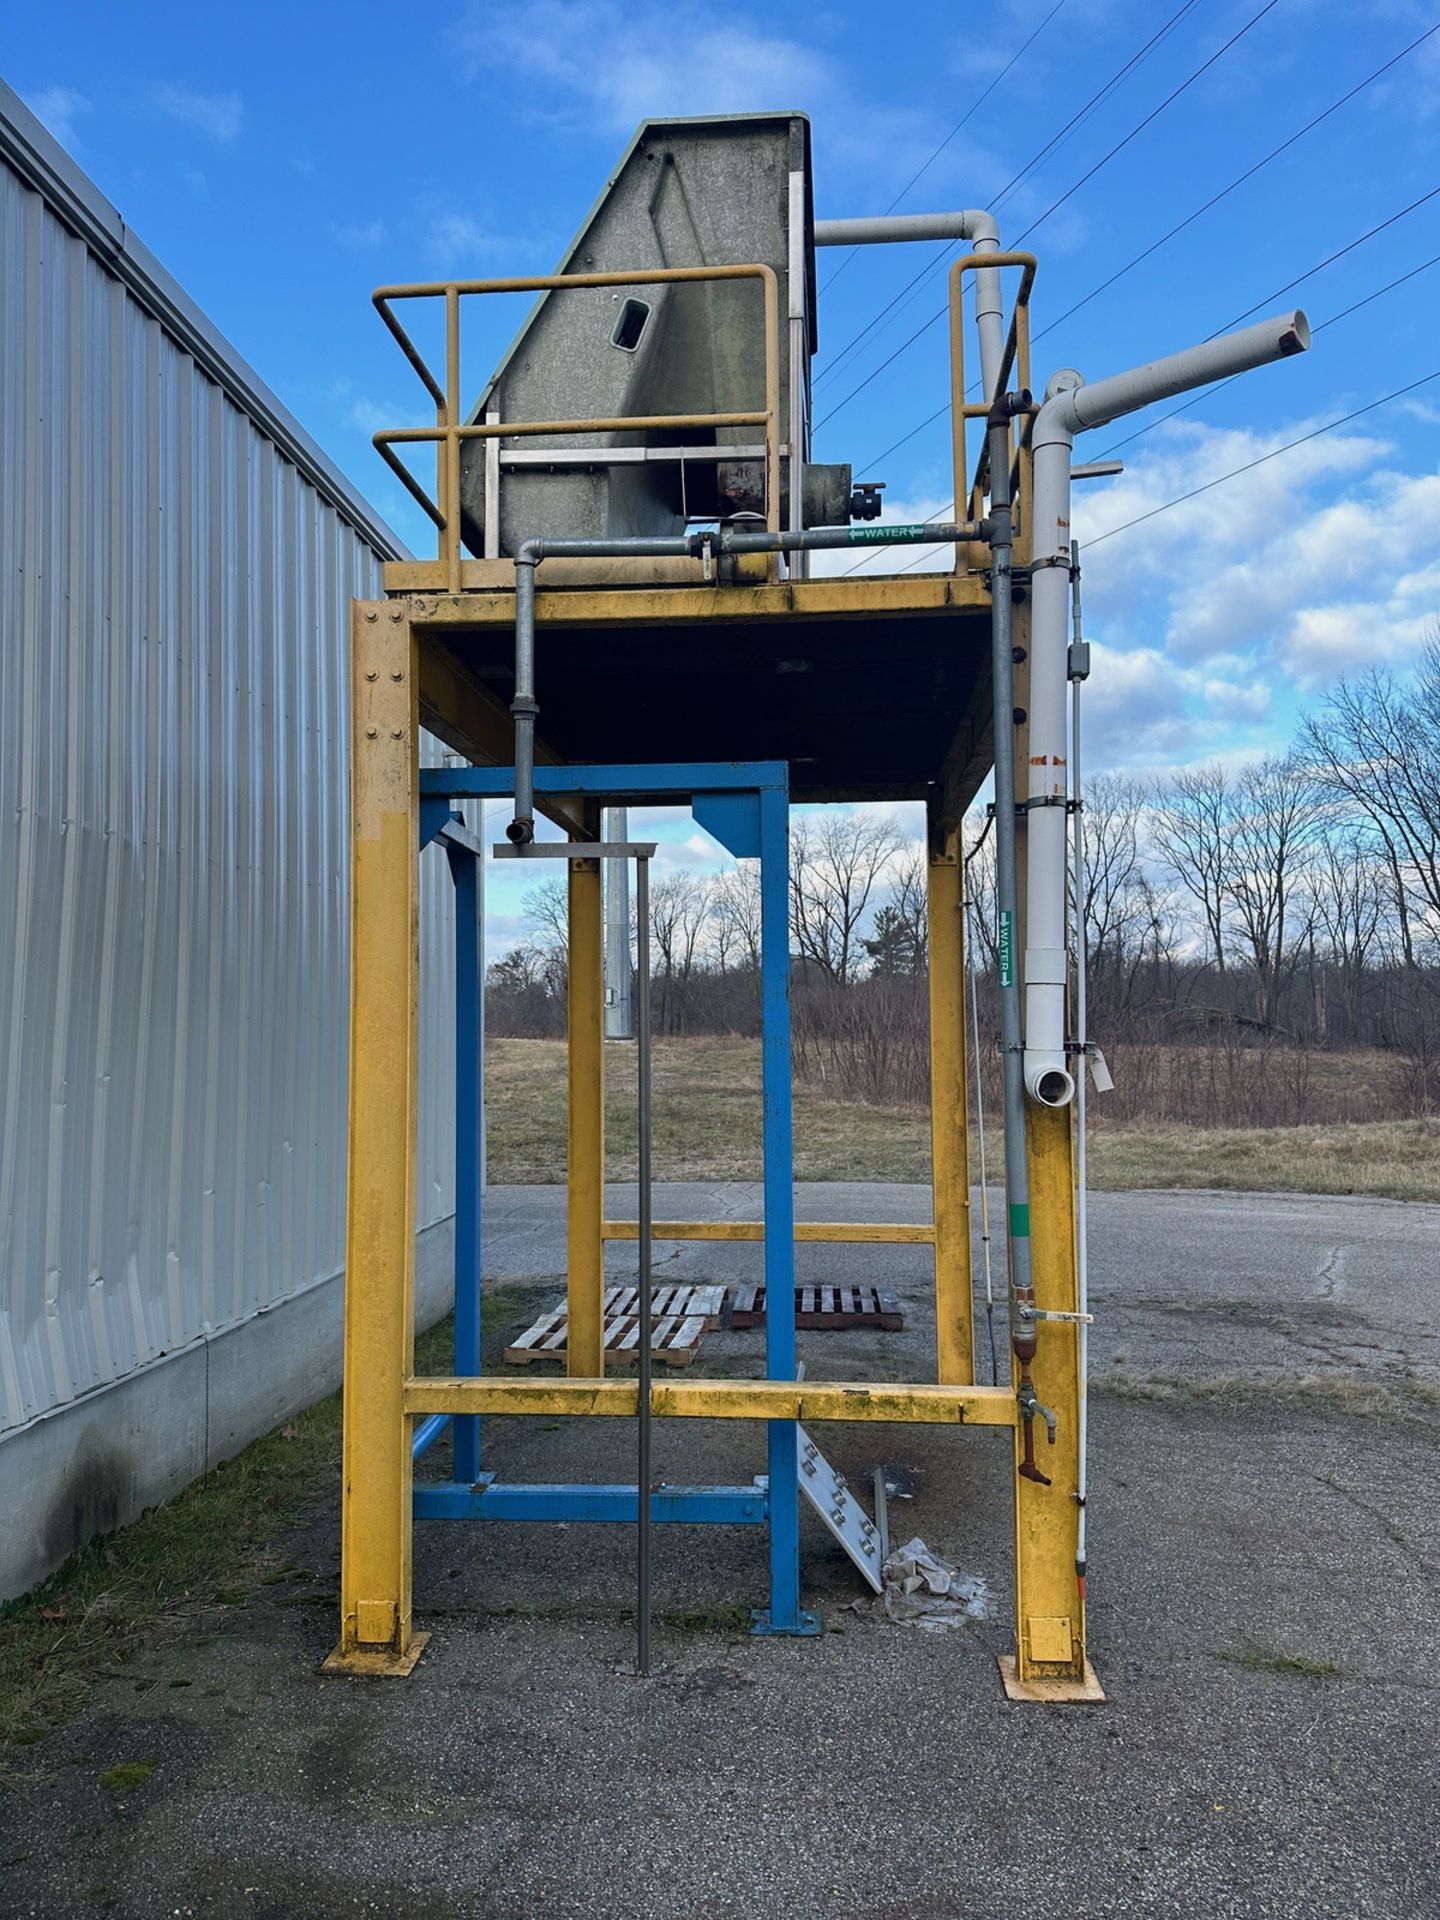 Bauer Hydrasieve on Platform (Approx. 12'6" x 8' and 12' From Ground) | Rig Fee $500